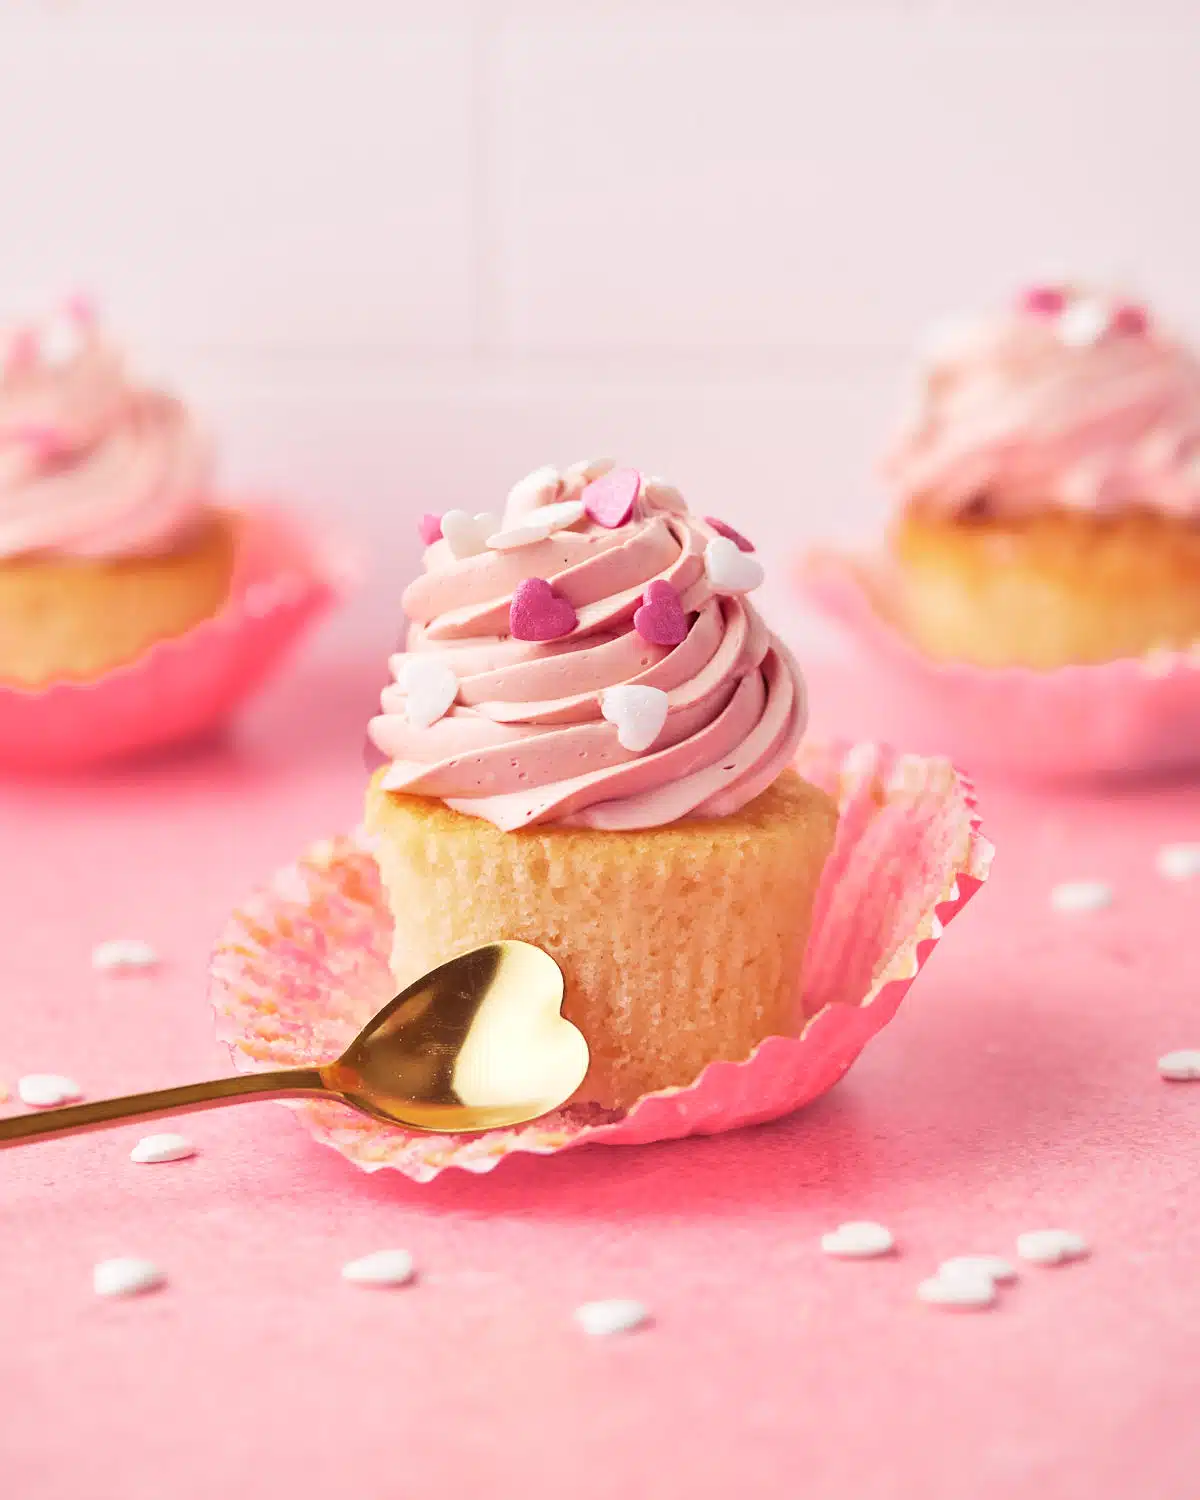 Valentines cupcakes on a pink background with white heart sprinkles all around.